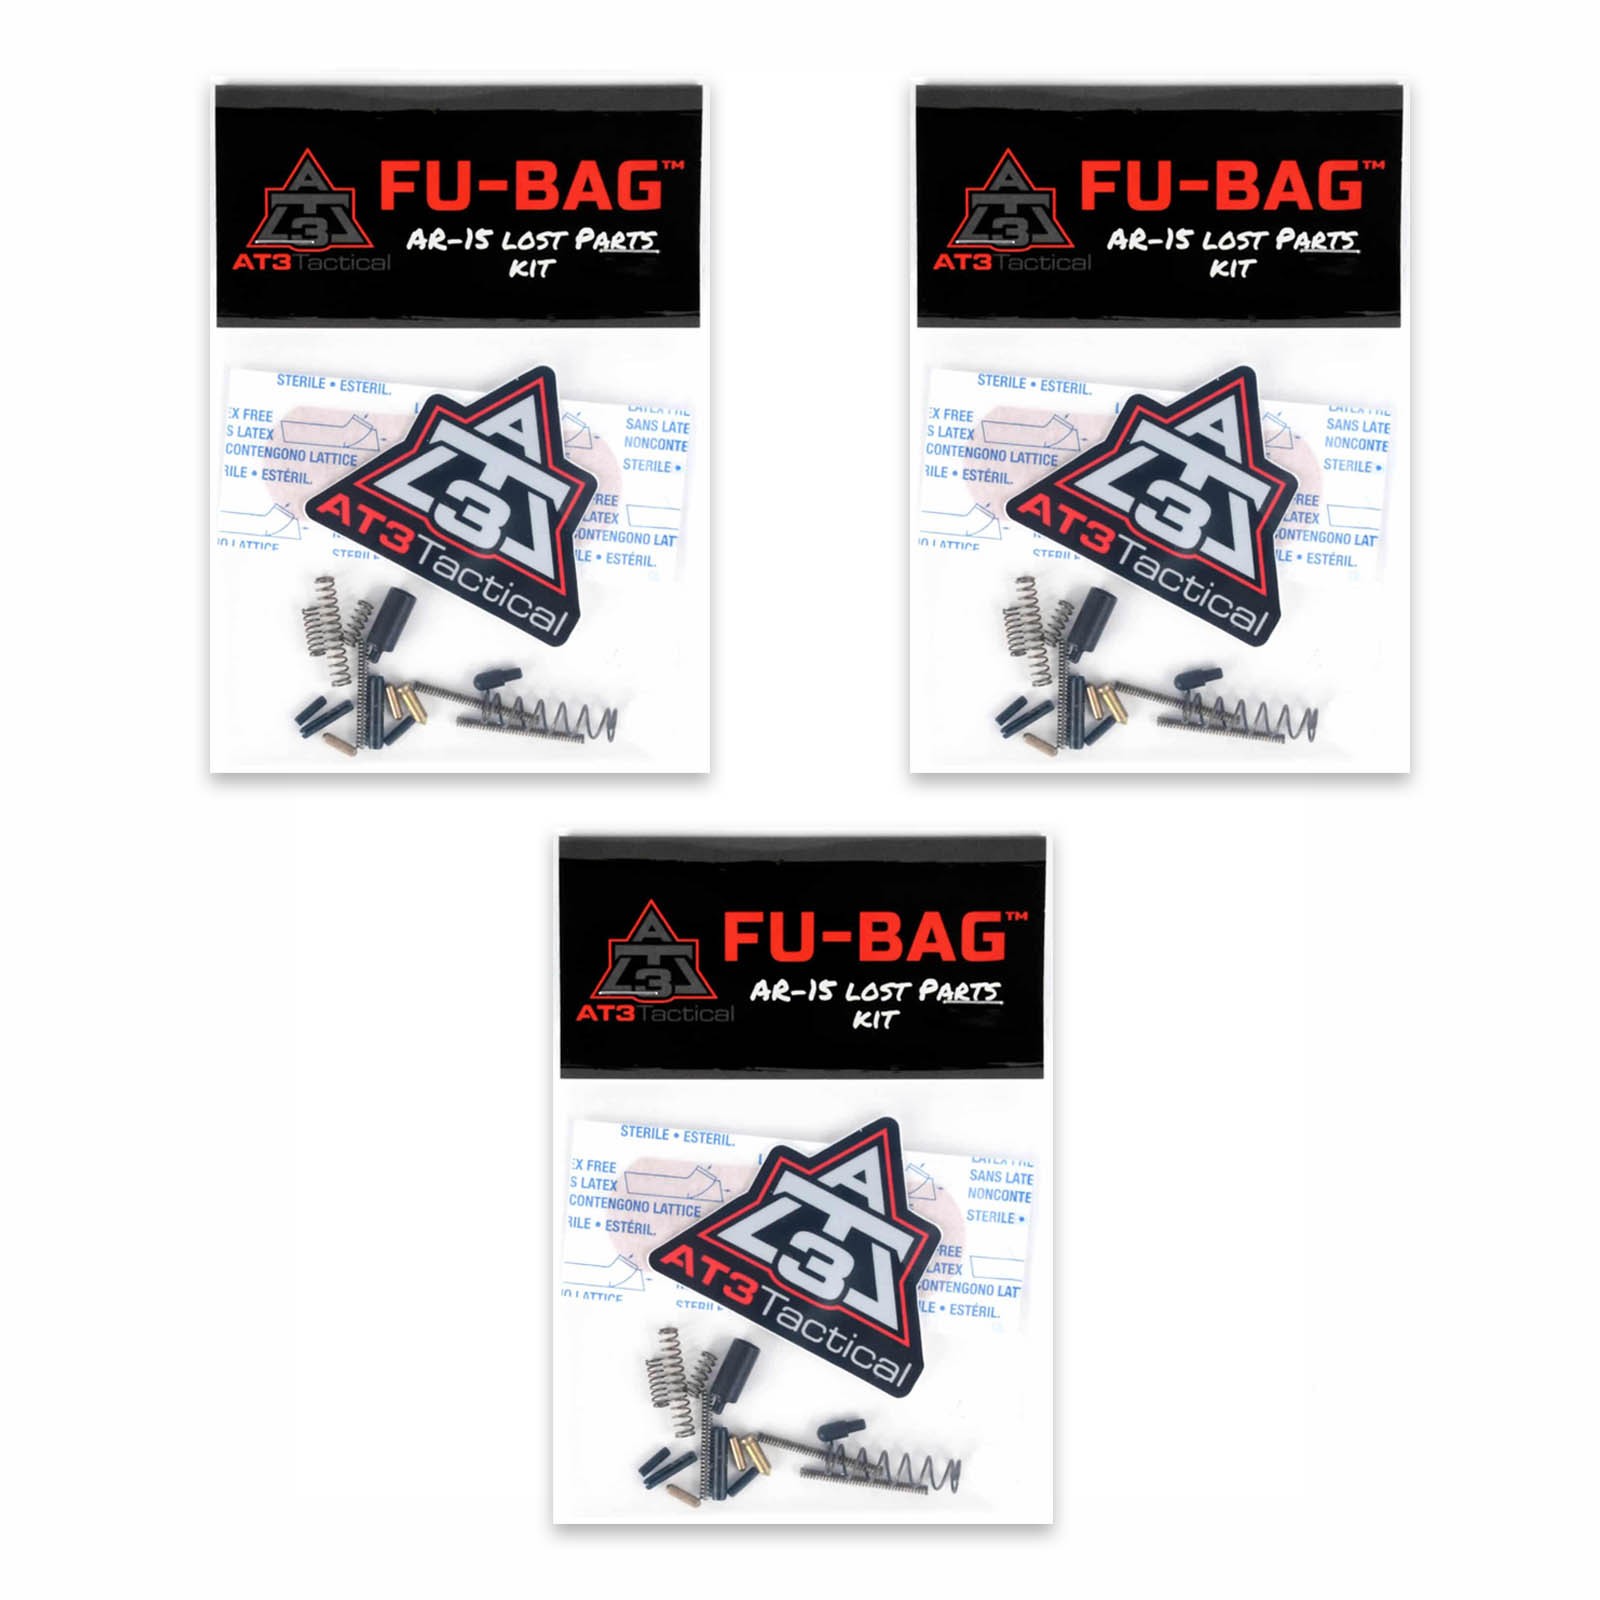 AT3™ FU-BAG™ AR-15 Lost Parts Kit – Springs, Detents, Replacement Components